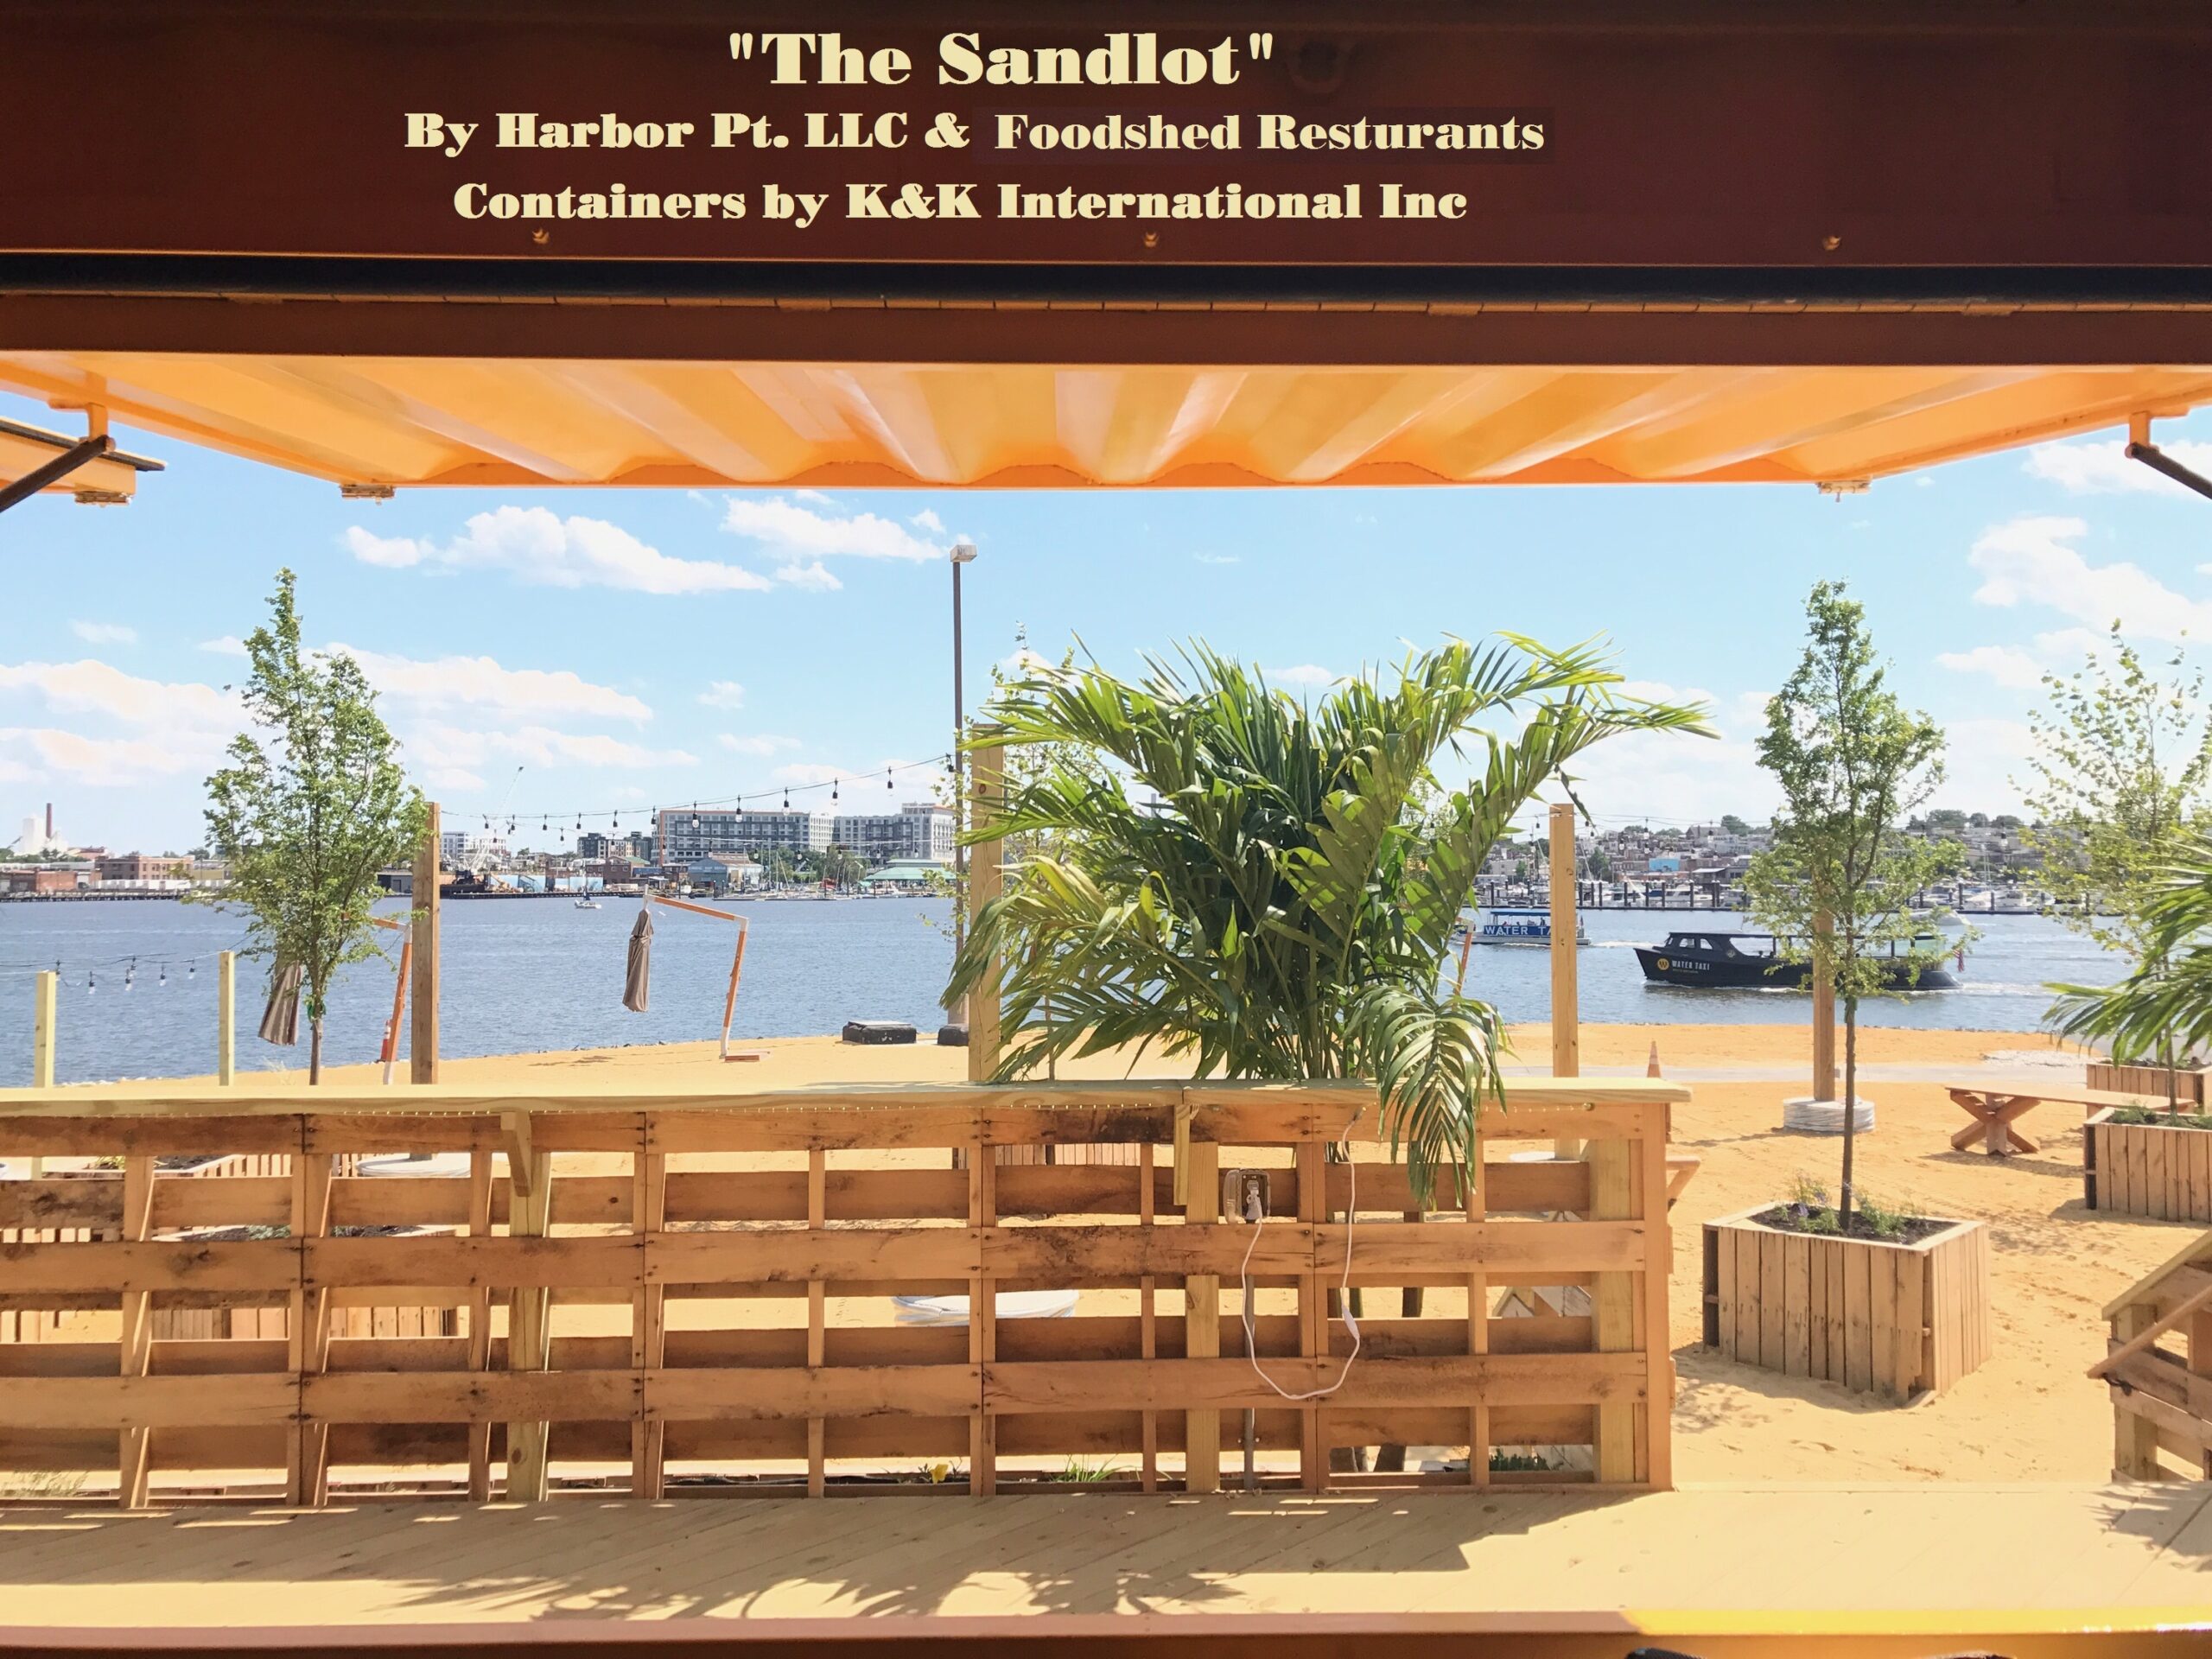 "The Sand Lot" By Harbor Point. LLC & Foodshed Resturants made with containter provided by K+K Containers